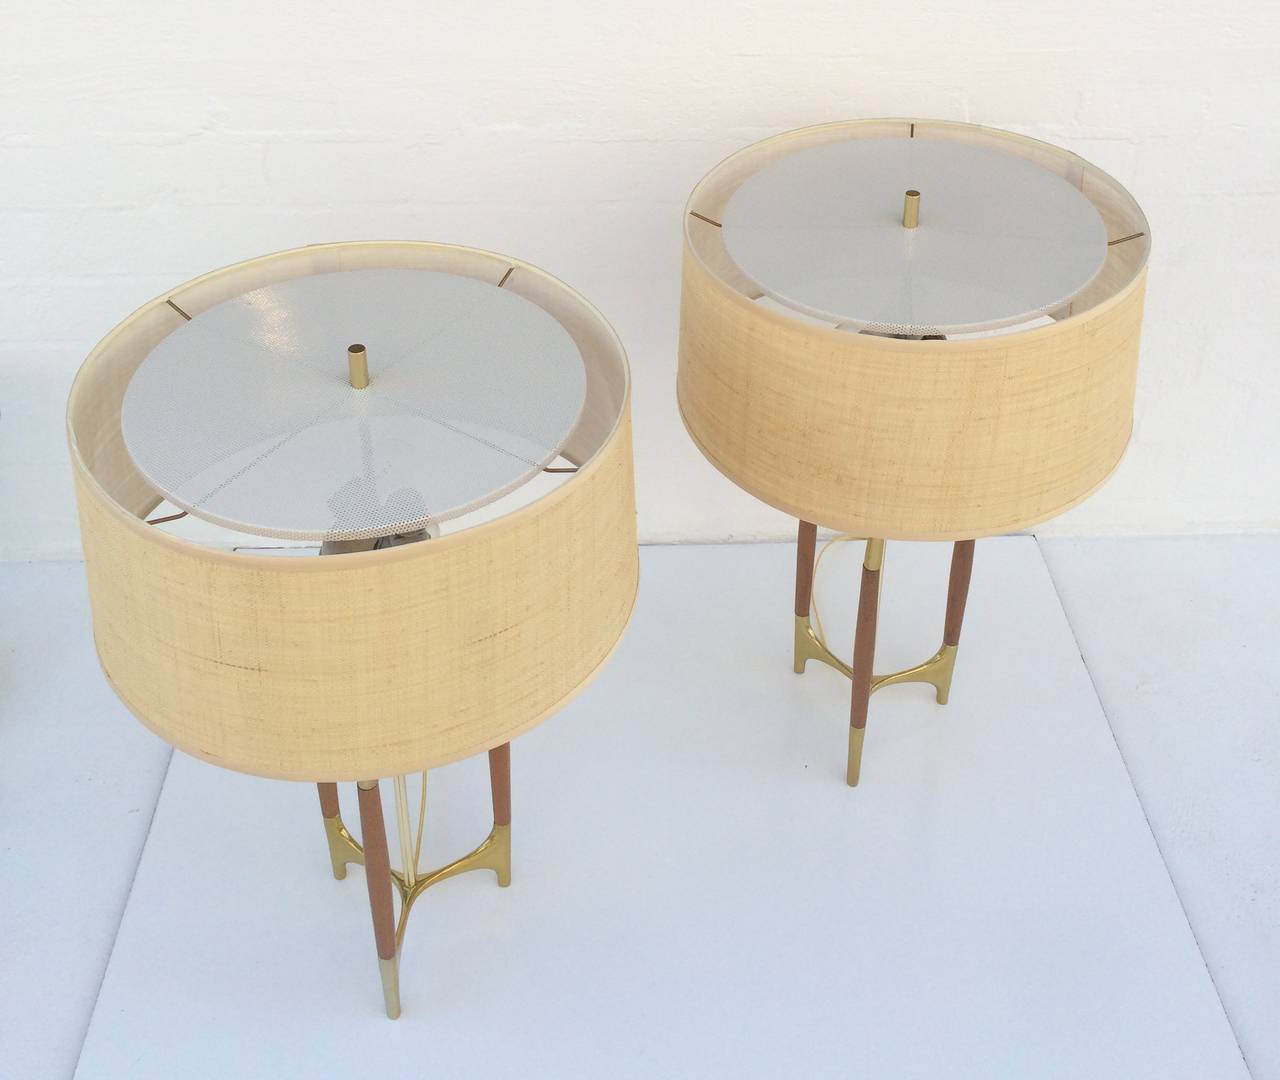 American Brass and Walnut Tables Lamps Designed by Gerald Thurston for Lightolier